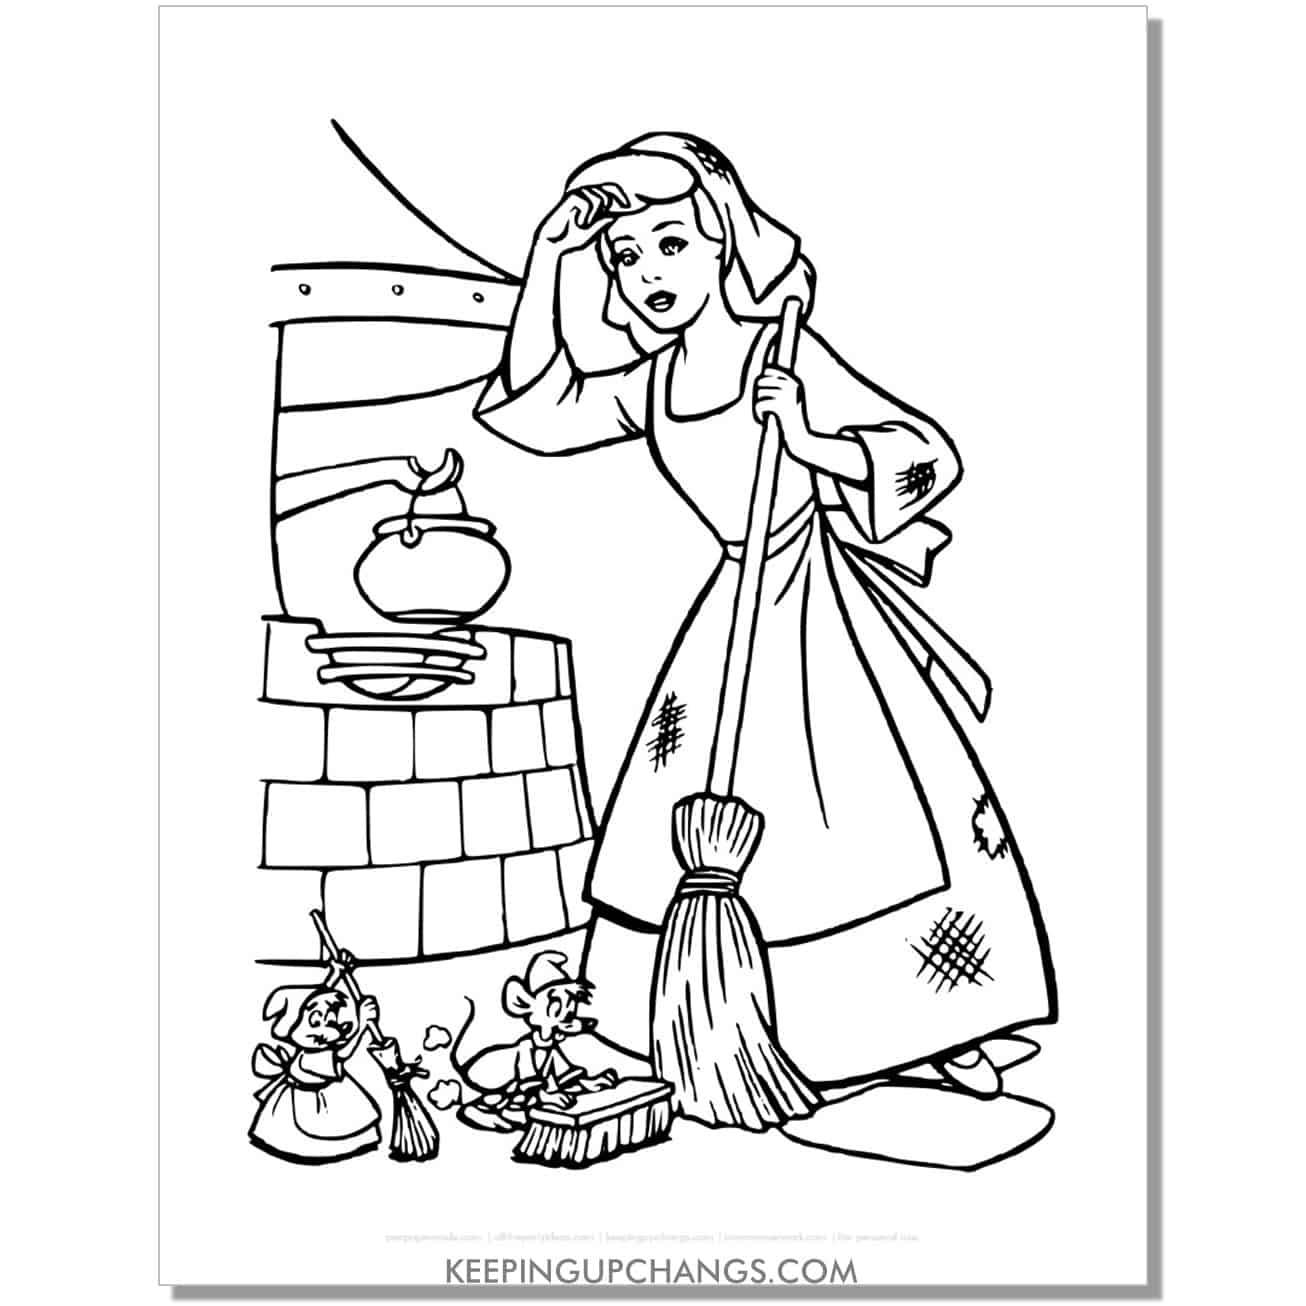 cinderella cleaning house all dirty coloring page, sheet.